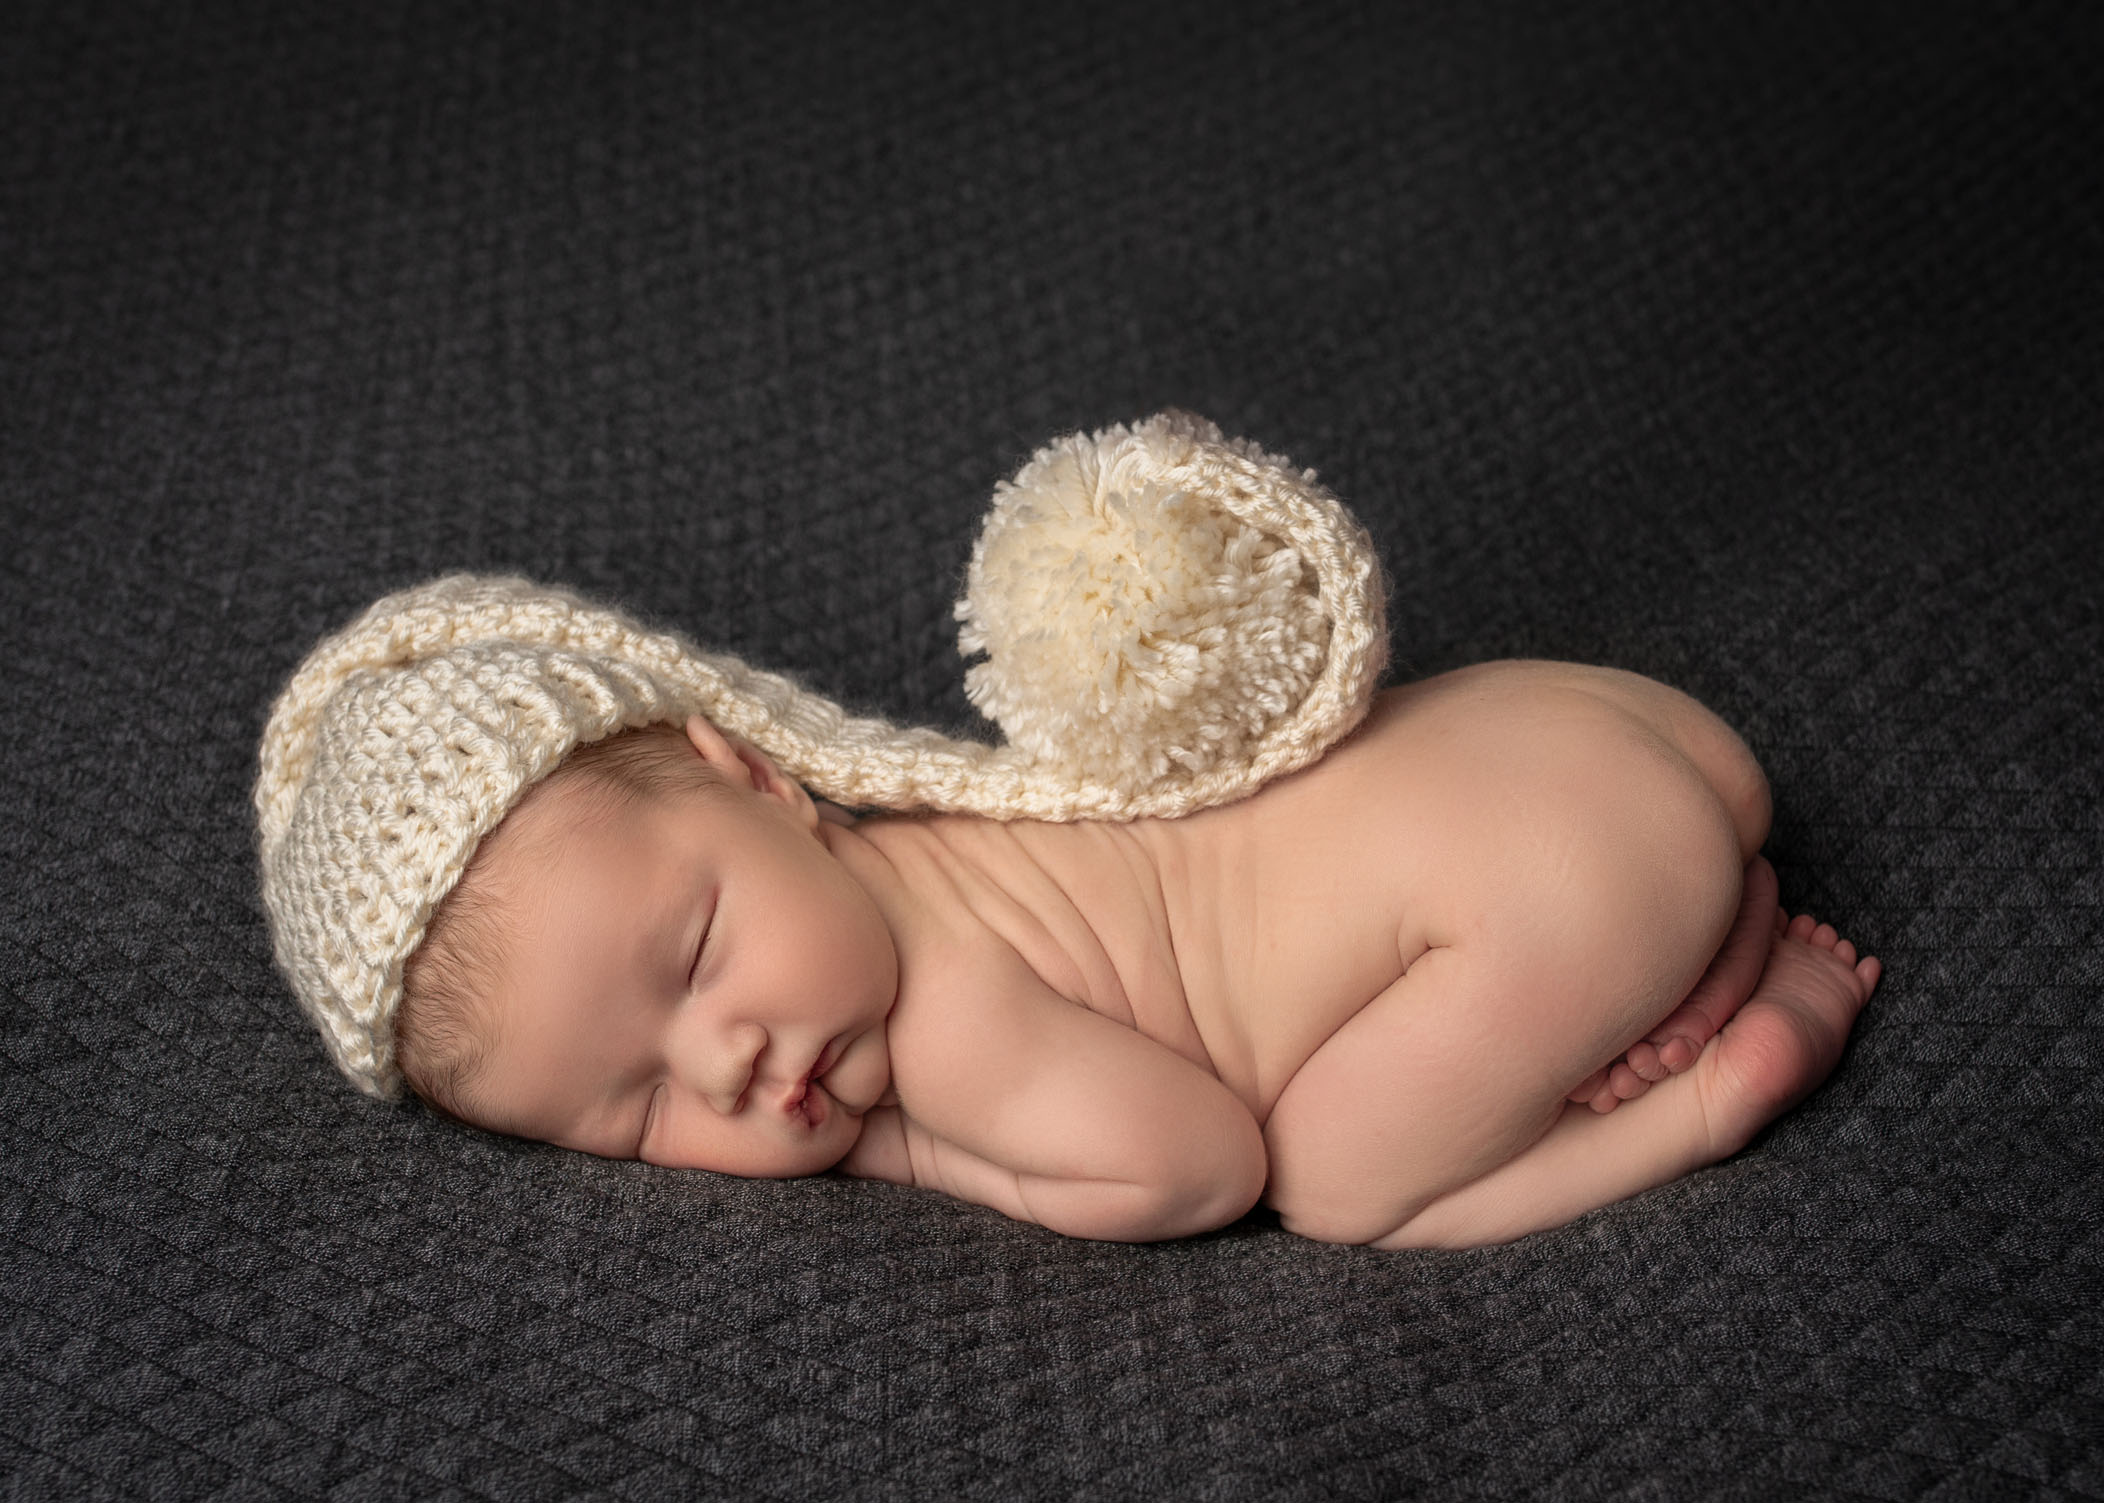 Newborn sleeping in bum up pose with long knitted hat on his head